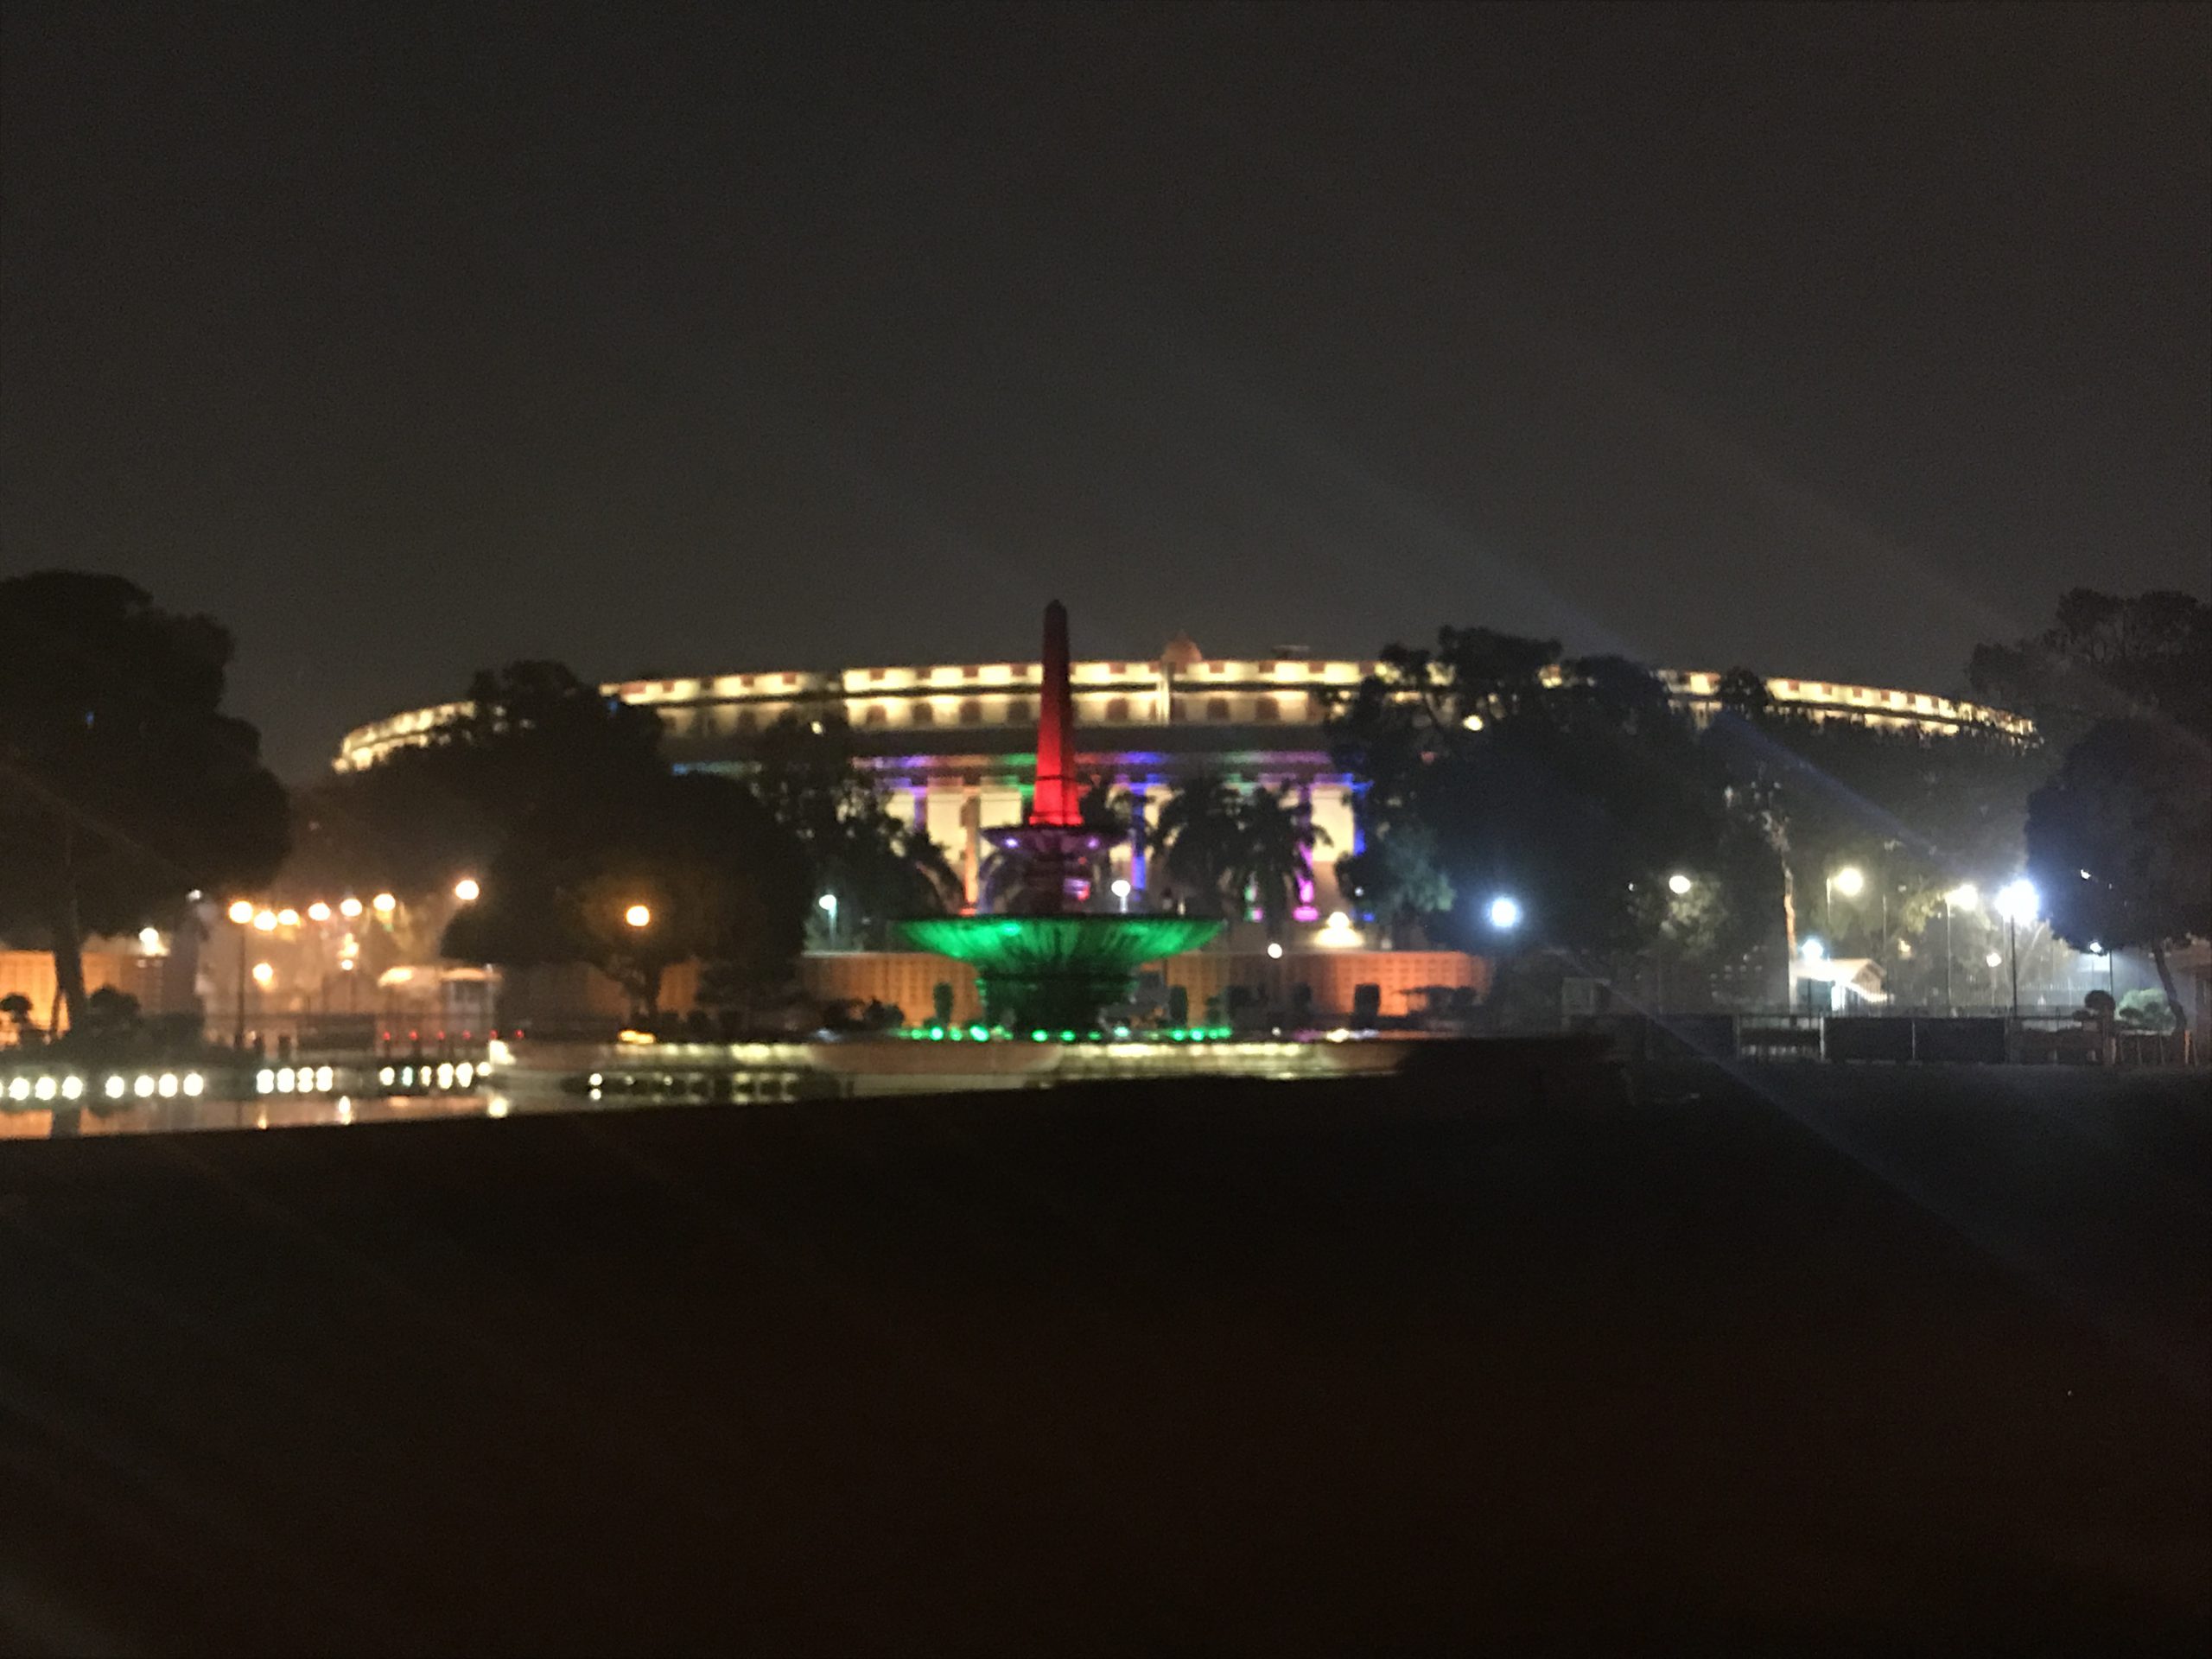 The Parliament in Delhi India as a proof of the British influence on the Indian architecture